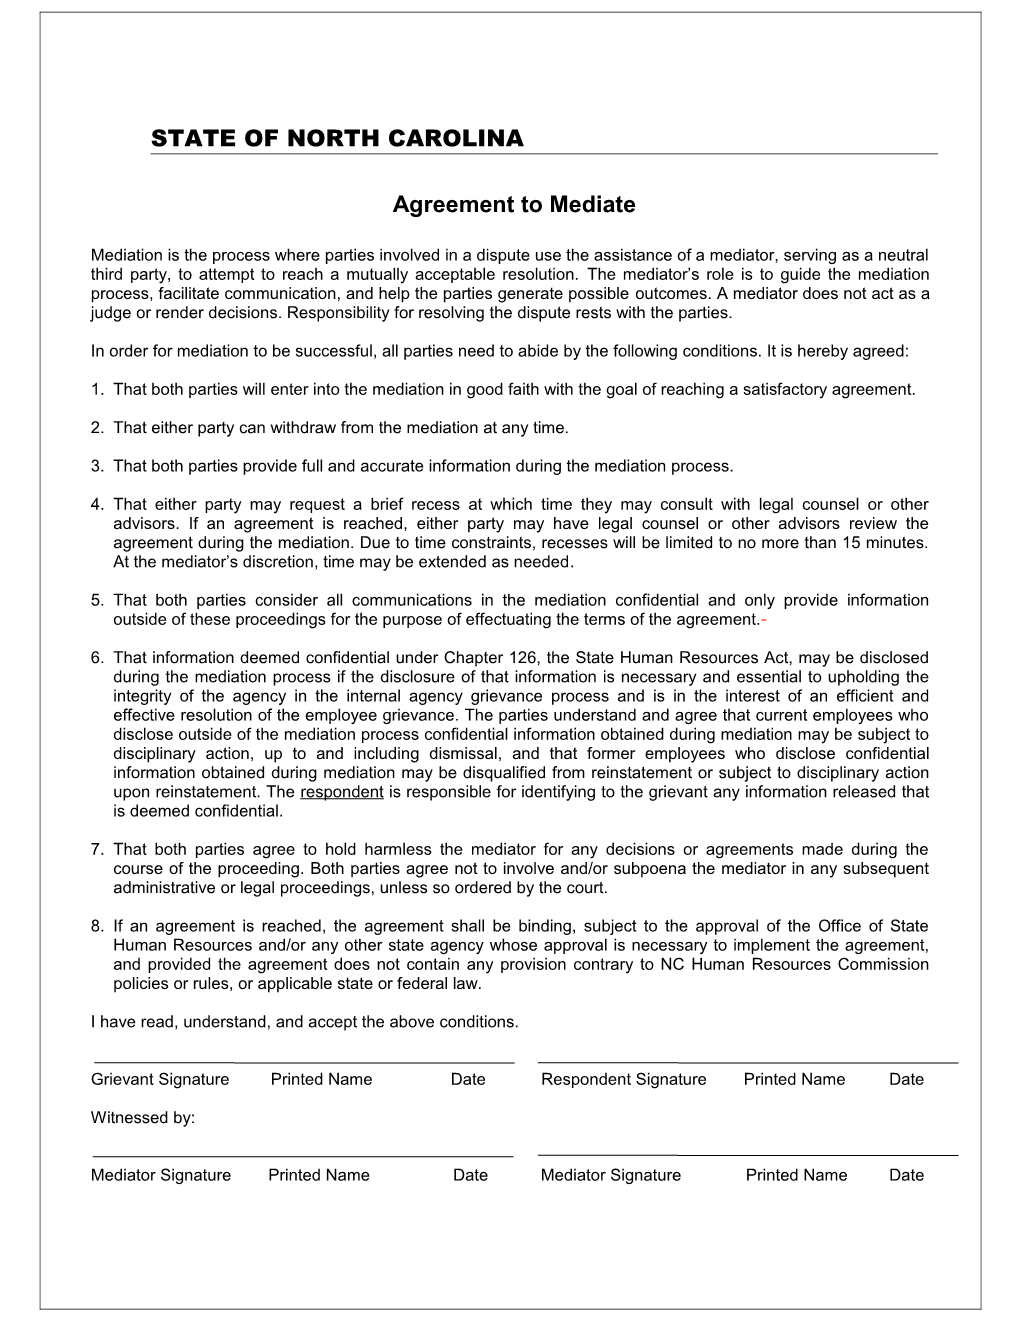 Agreement to Mediate